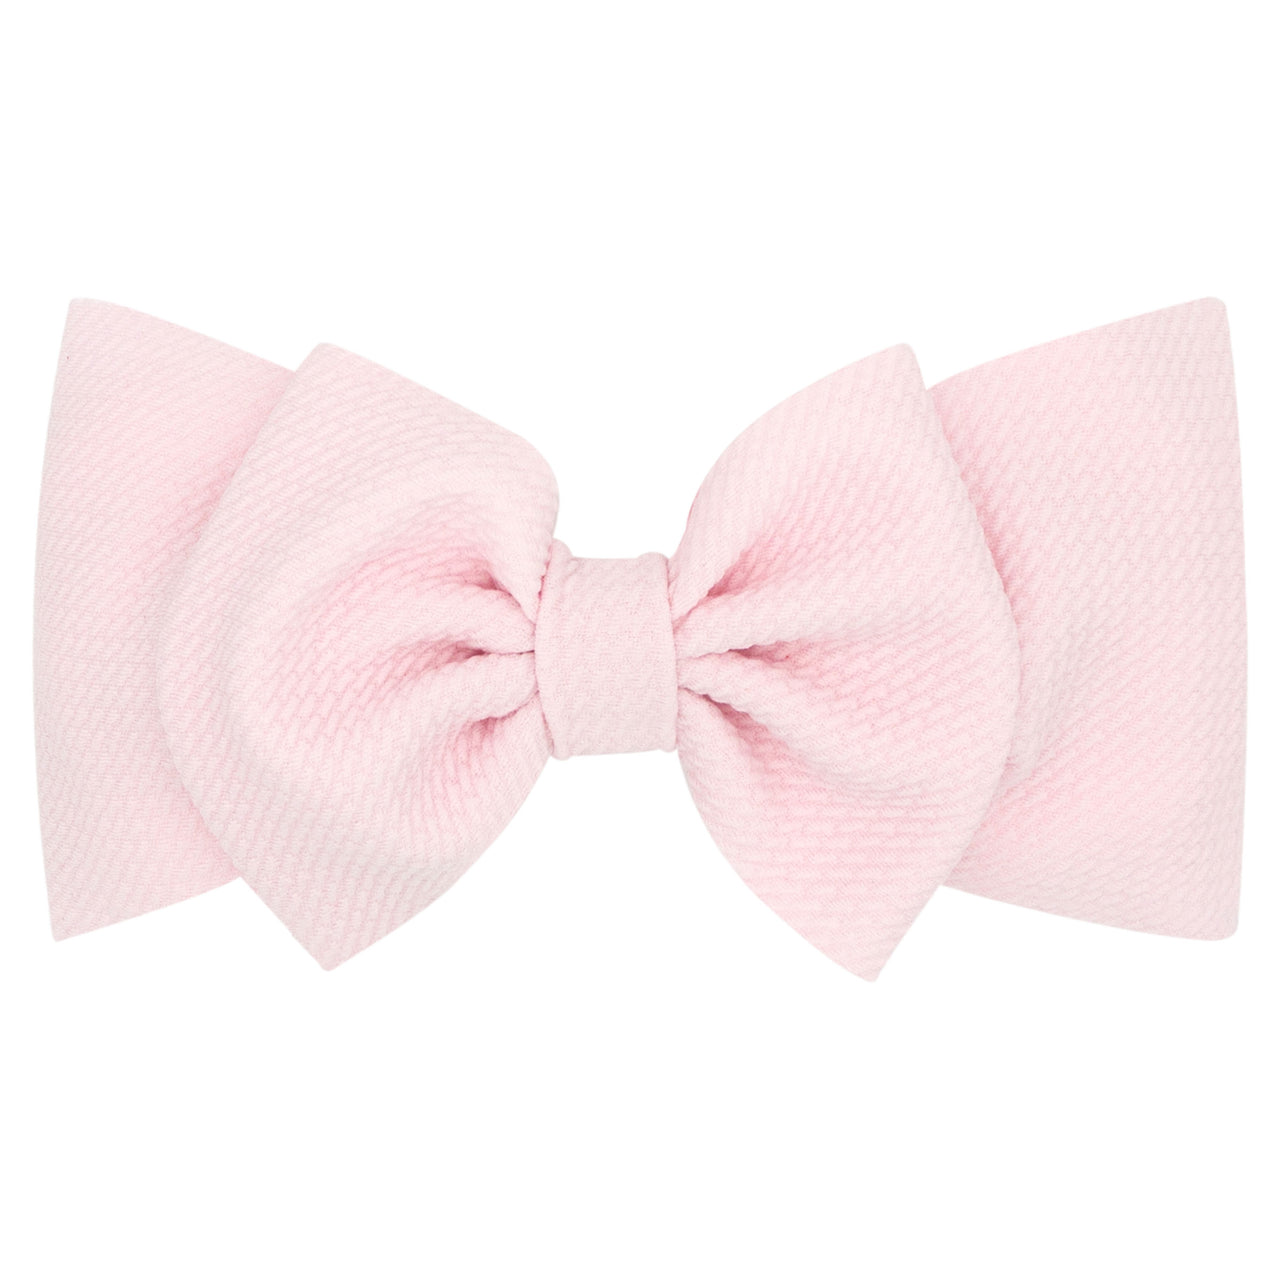 Wee Ones Textured Large Baby Girls Bowtie on Matching Wide Band